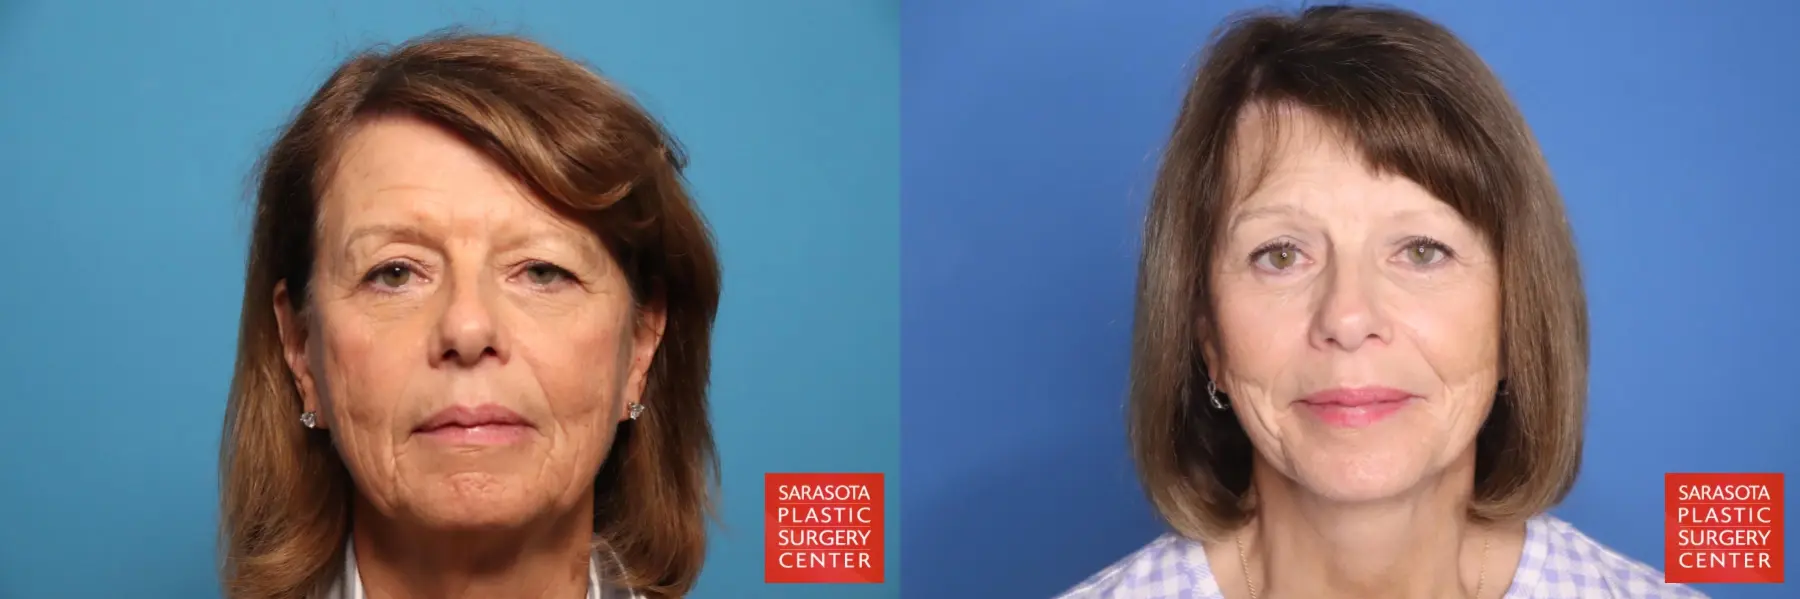 Facelift: Patient 66 - Before and After 1